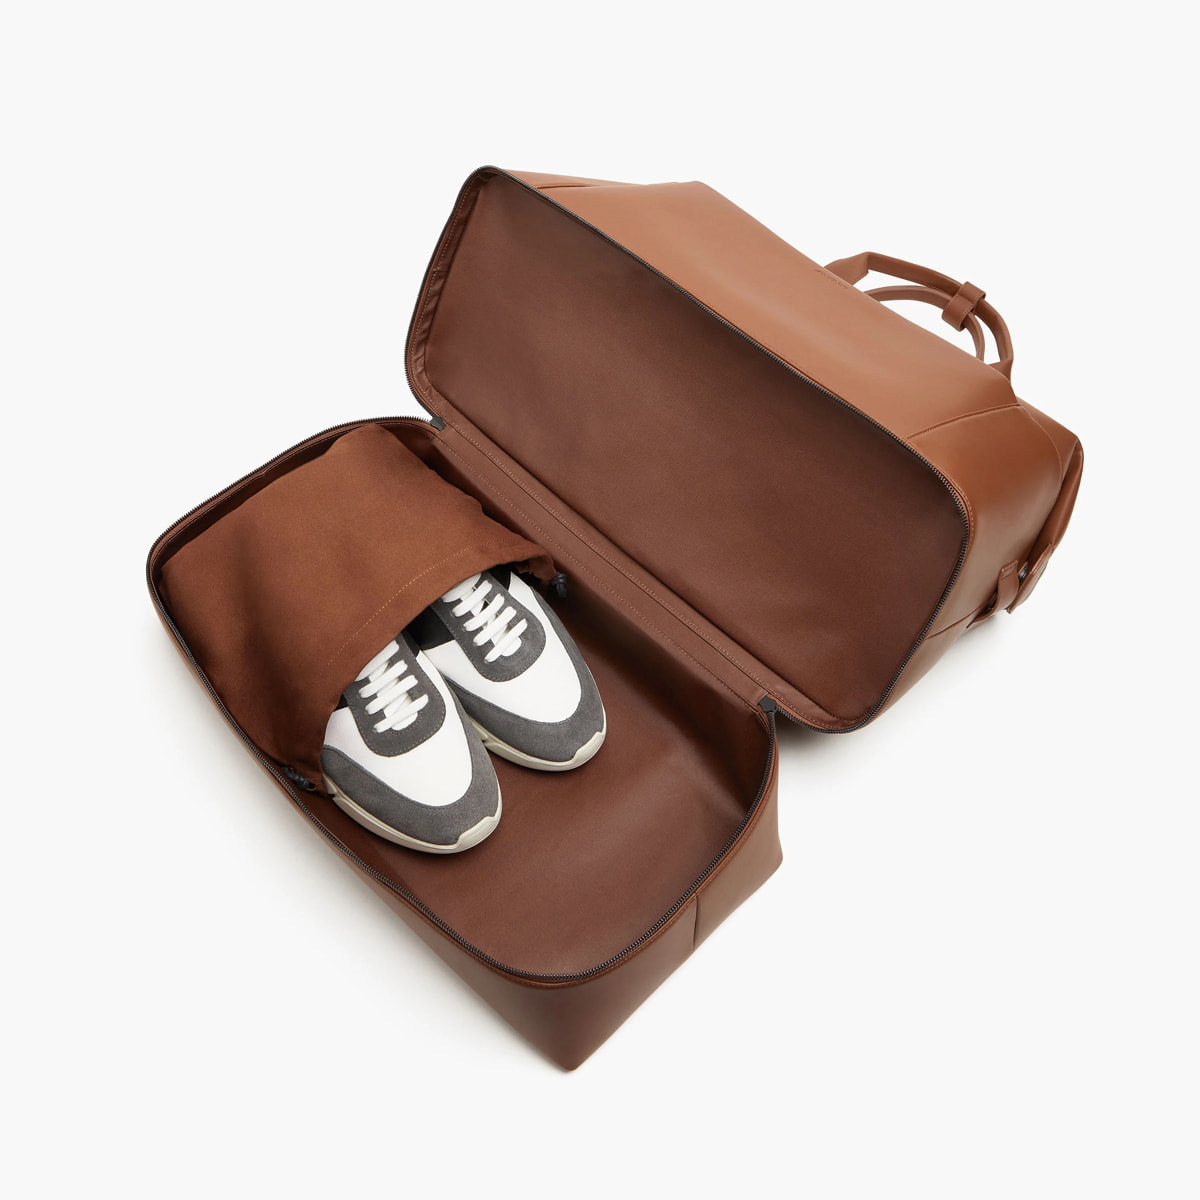 Weekend bag with shoe compartment